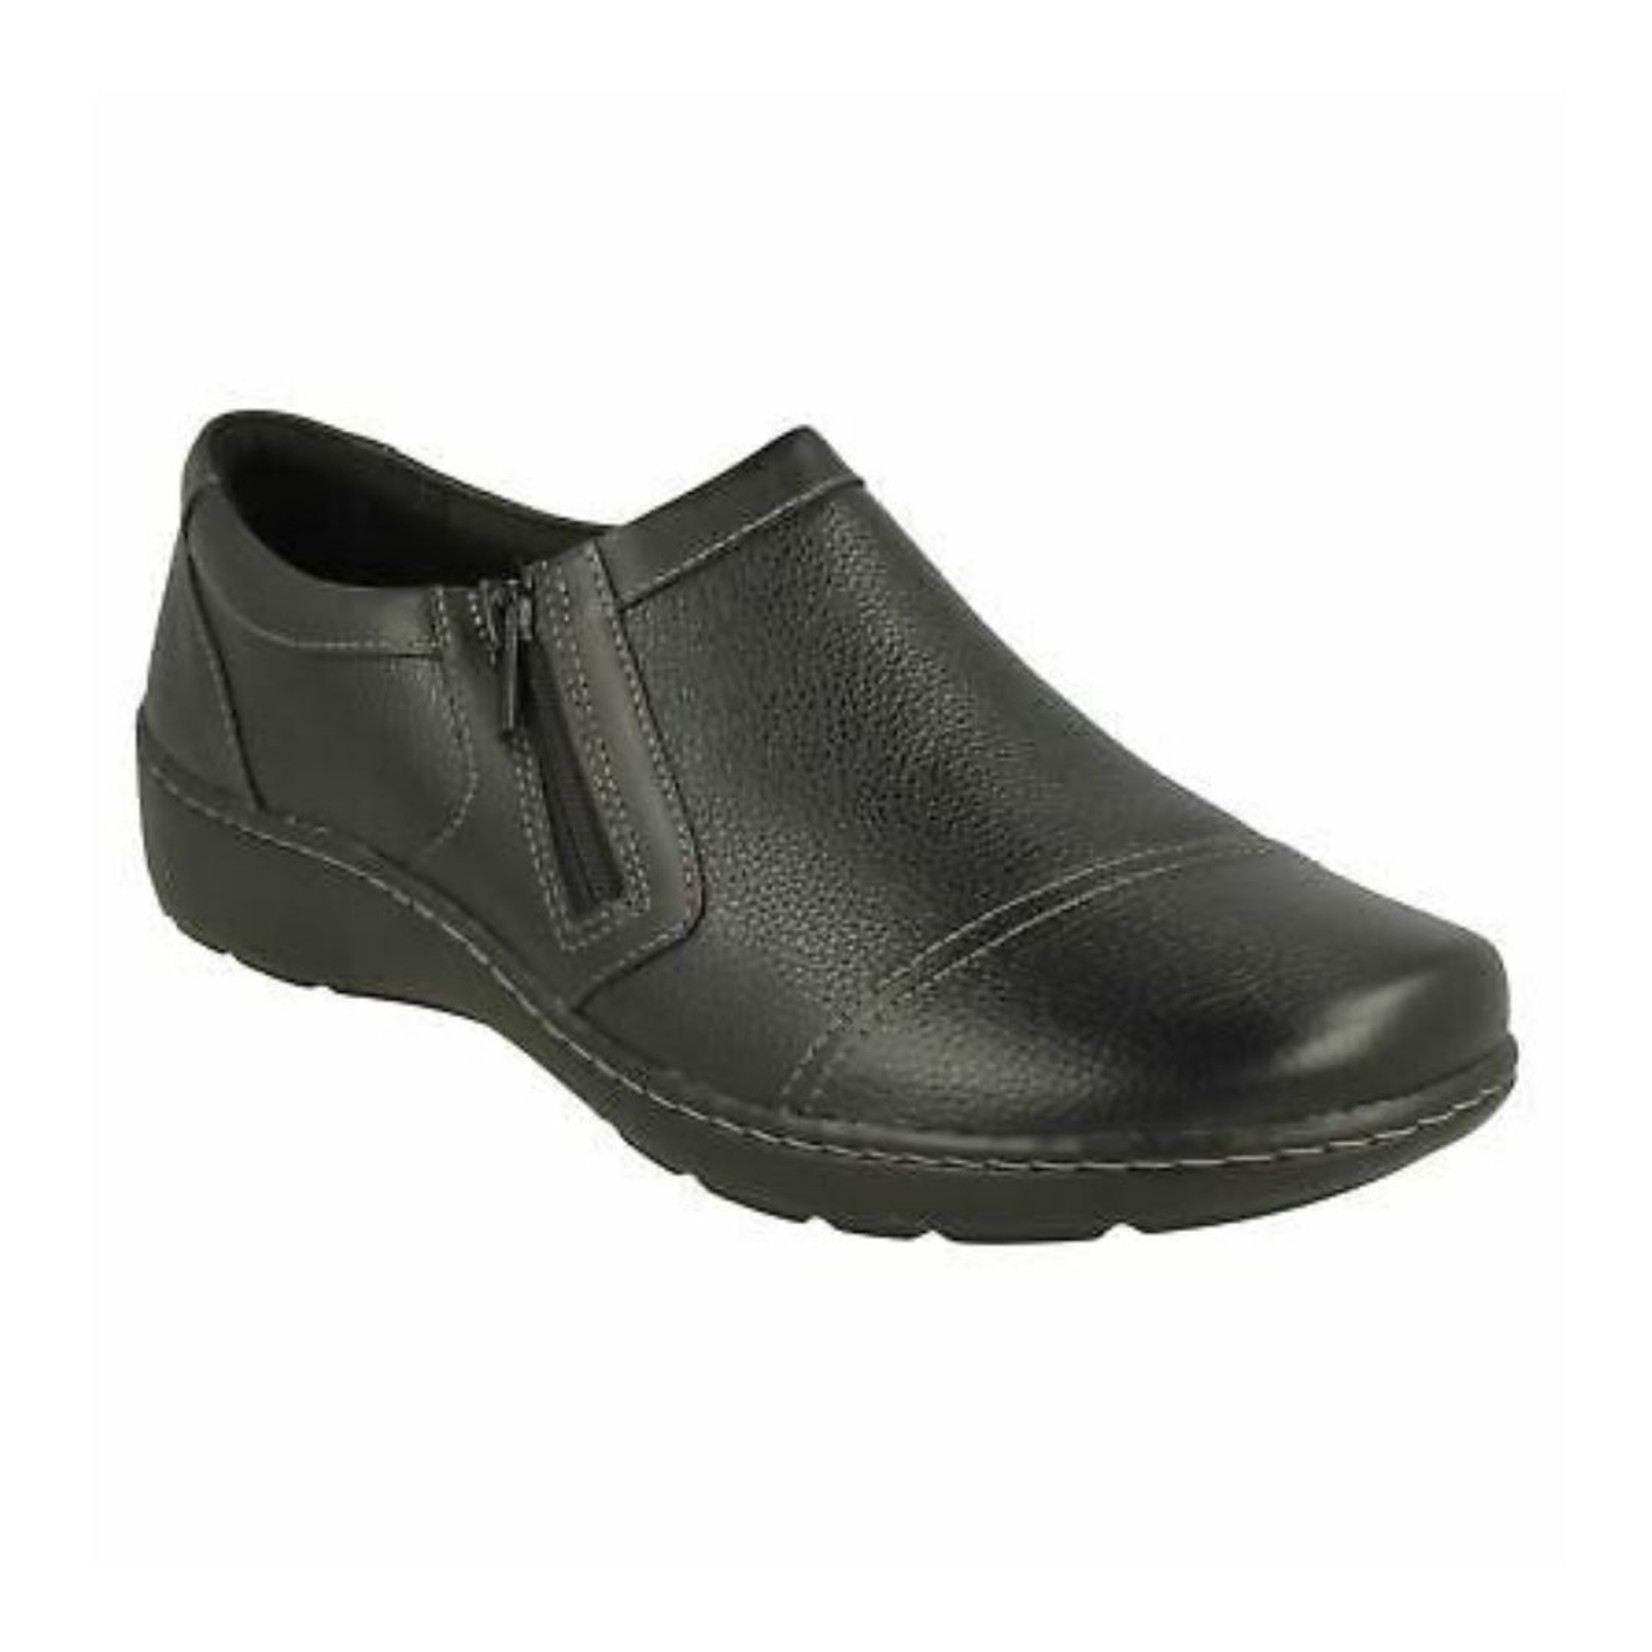 Clarks Clarks Cora Giny Women’s Slip-On Shoes